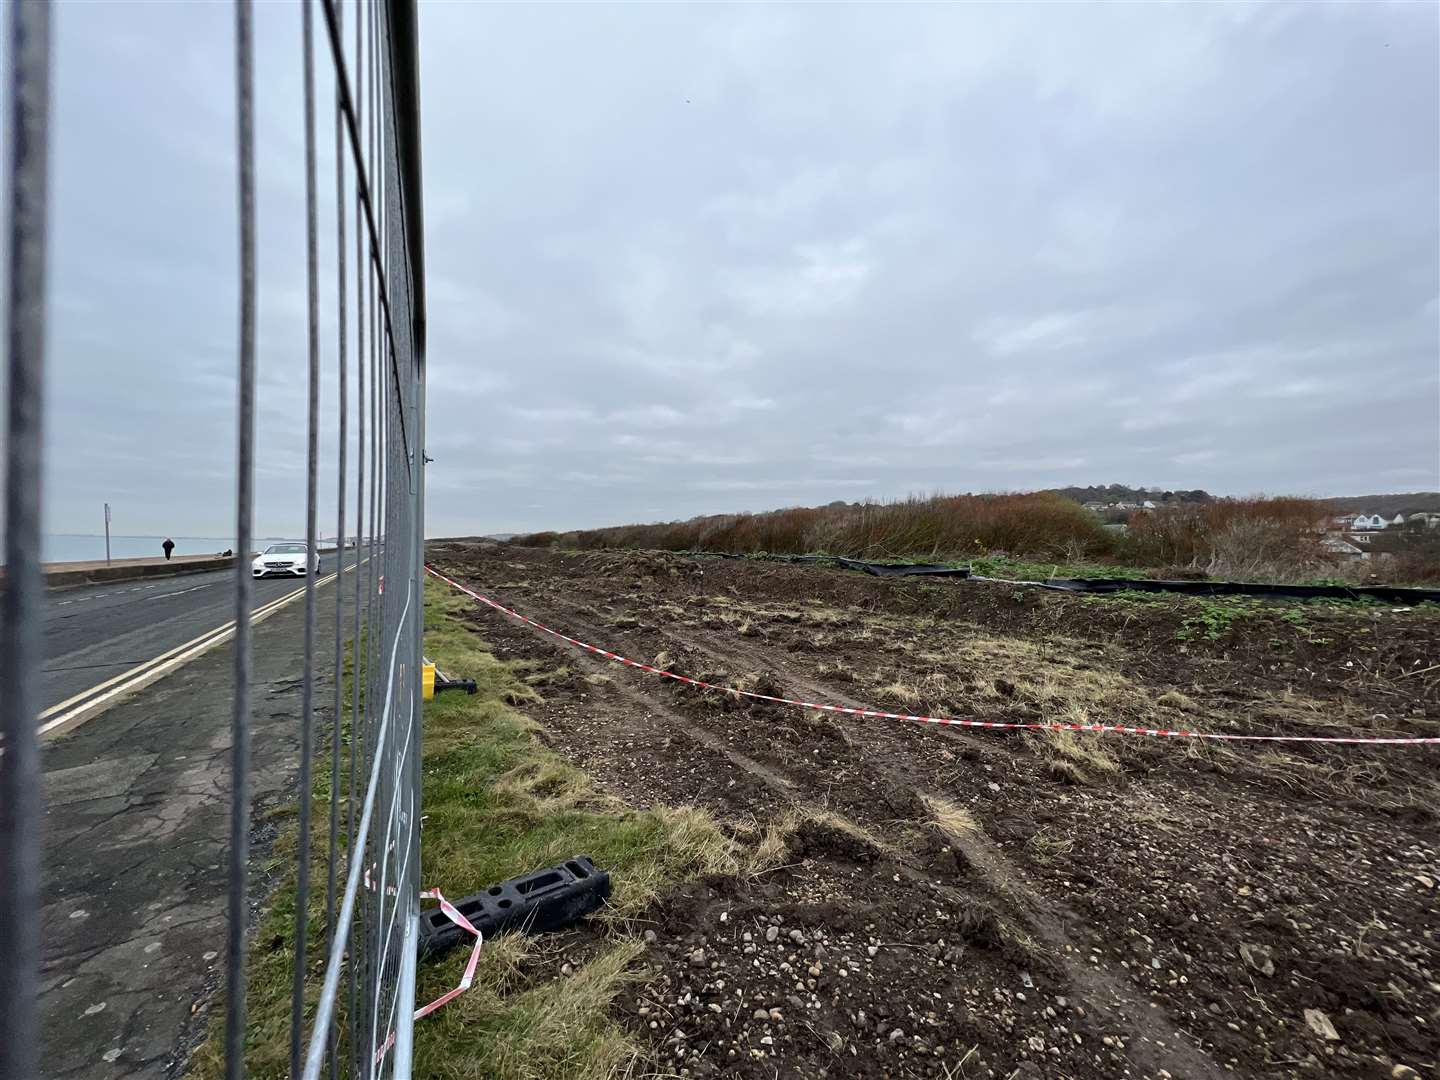 New fencing has gone up around parts of Princes Parade and land cleared in preparation for the construction next year. Picture: Barry Goodwin